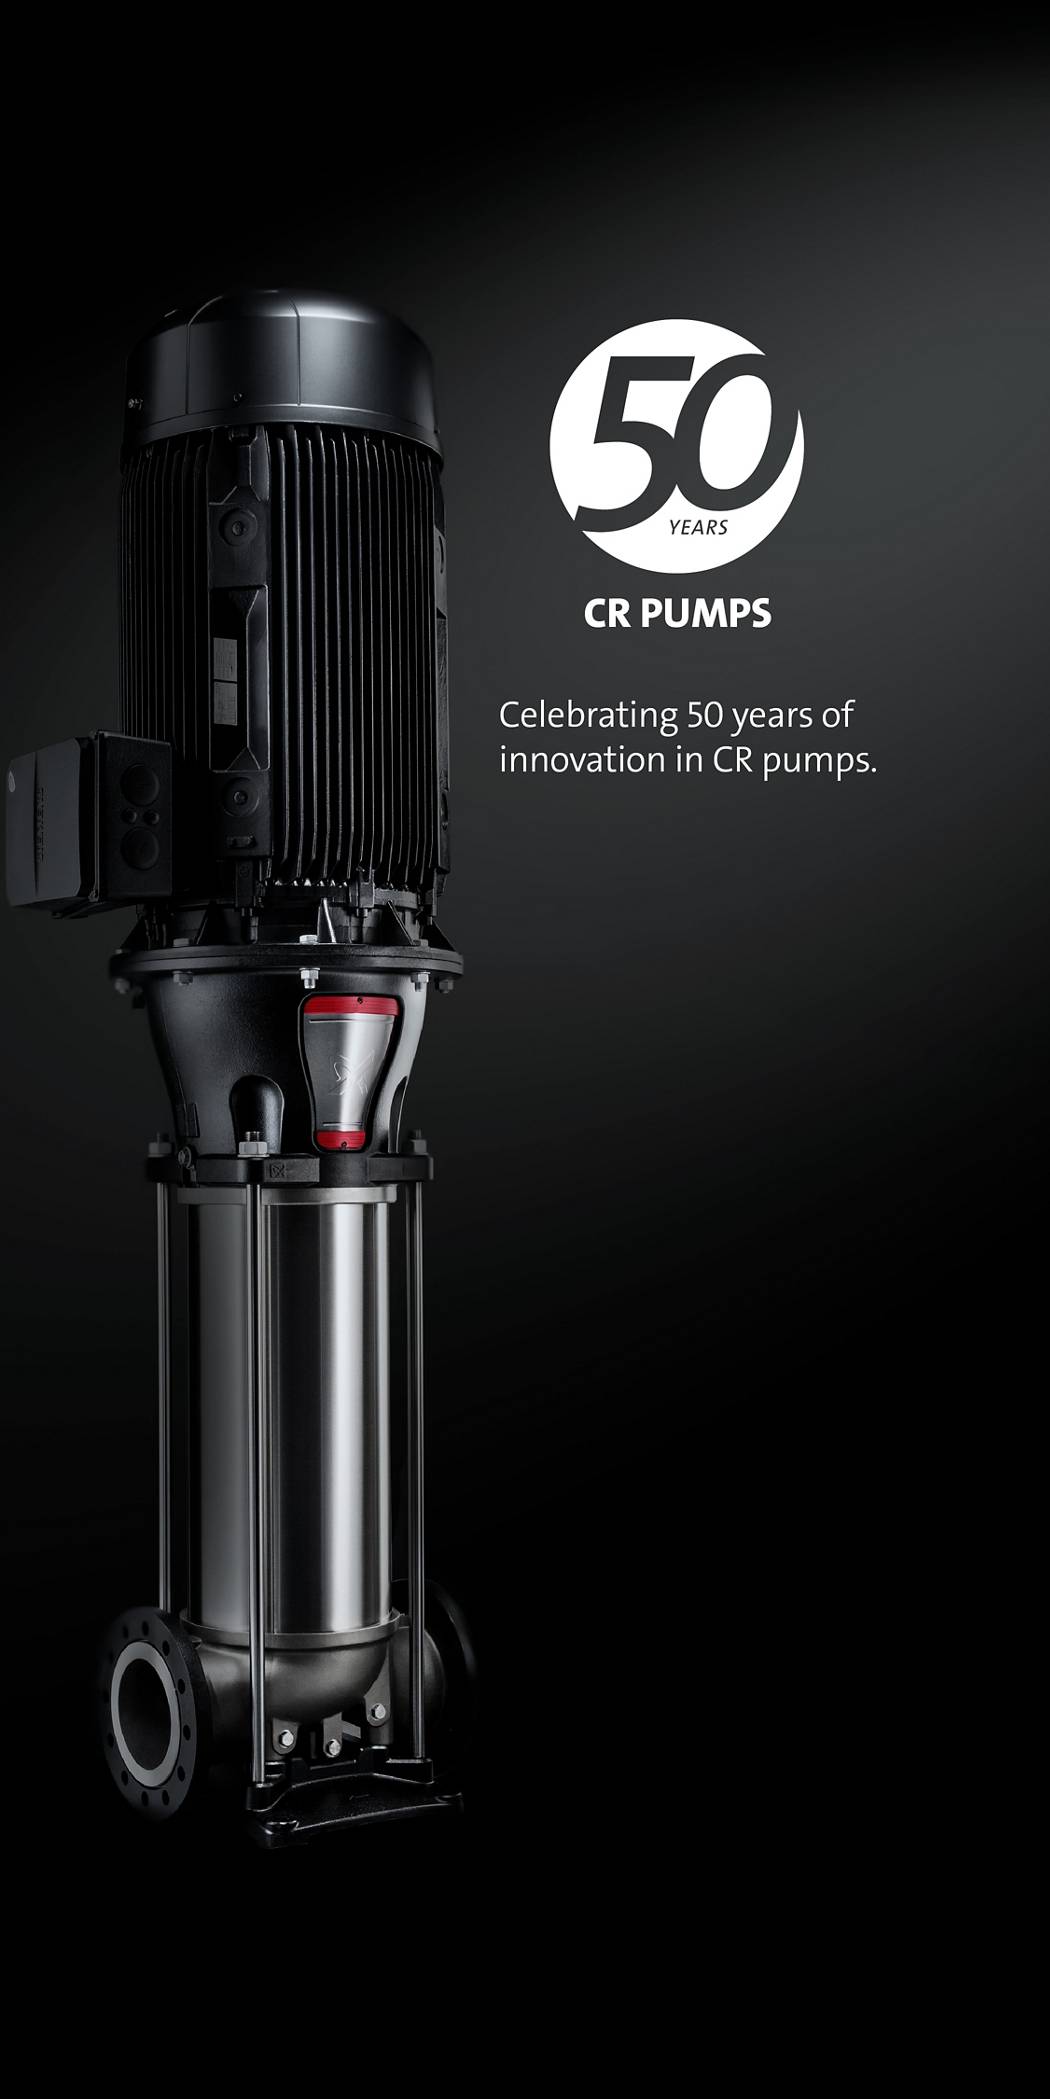 Grundfos India | The full range supplier pumps pump solutions. As a renowned pump manufacturer, Grundfos delivers efficient, reliable, and solutions all over the globe. Step into our world.